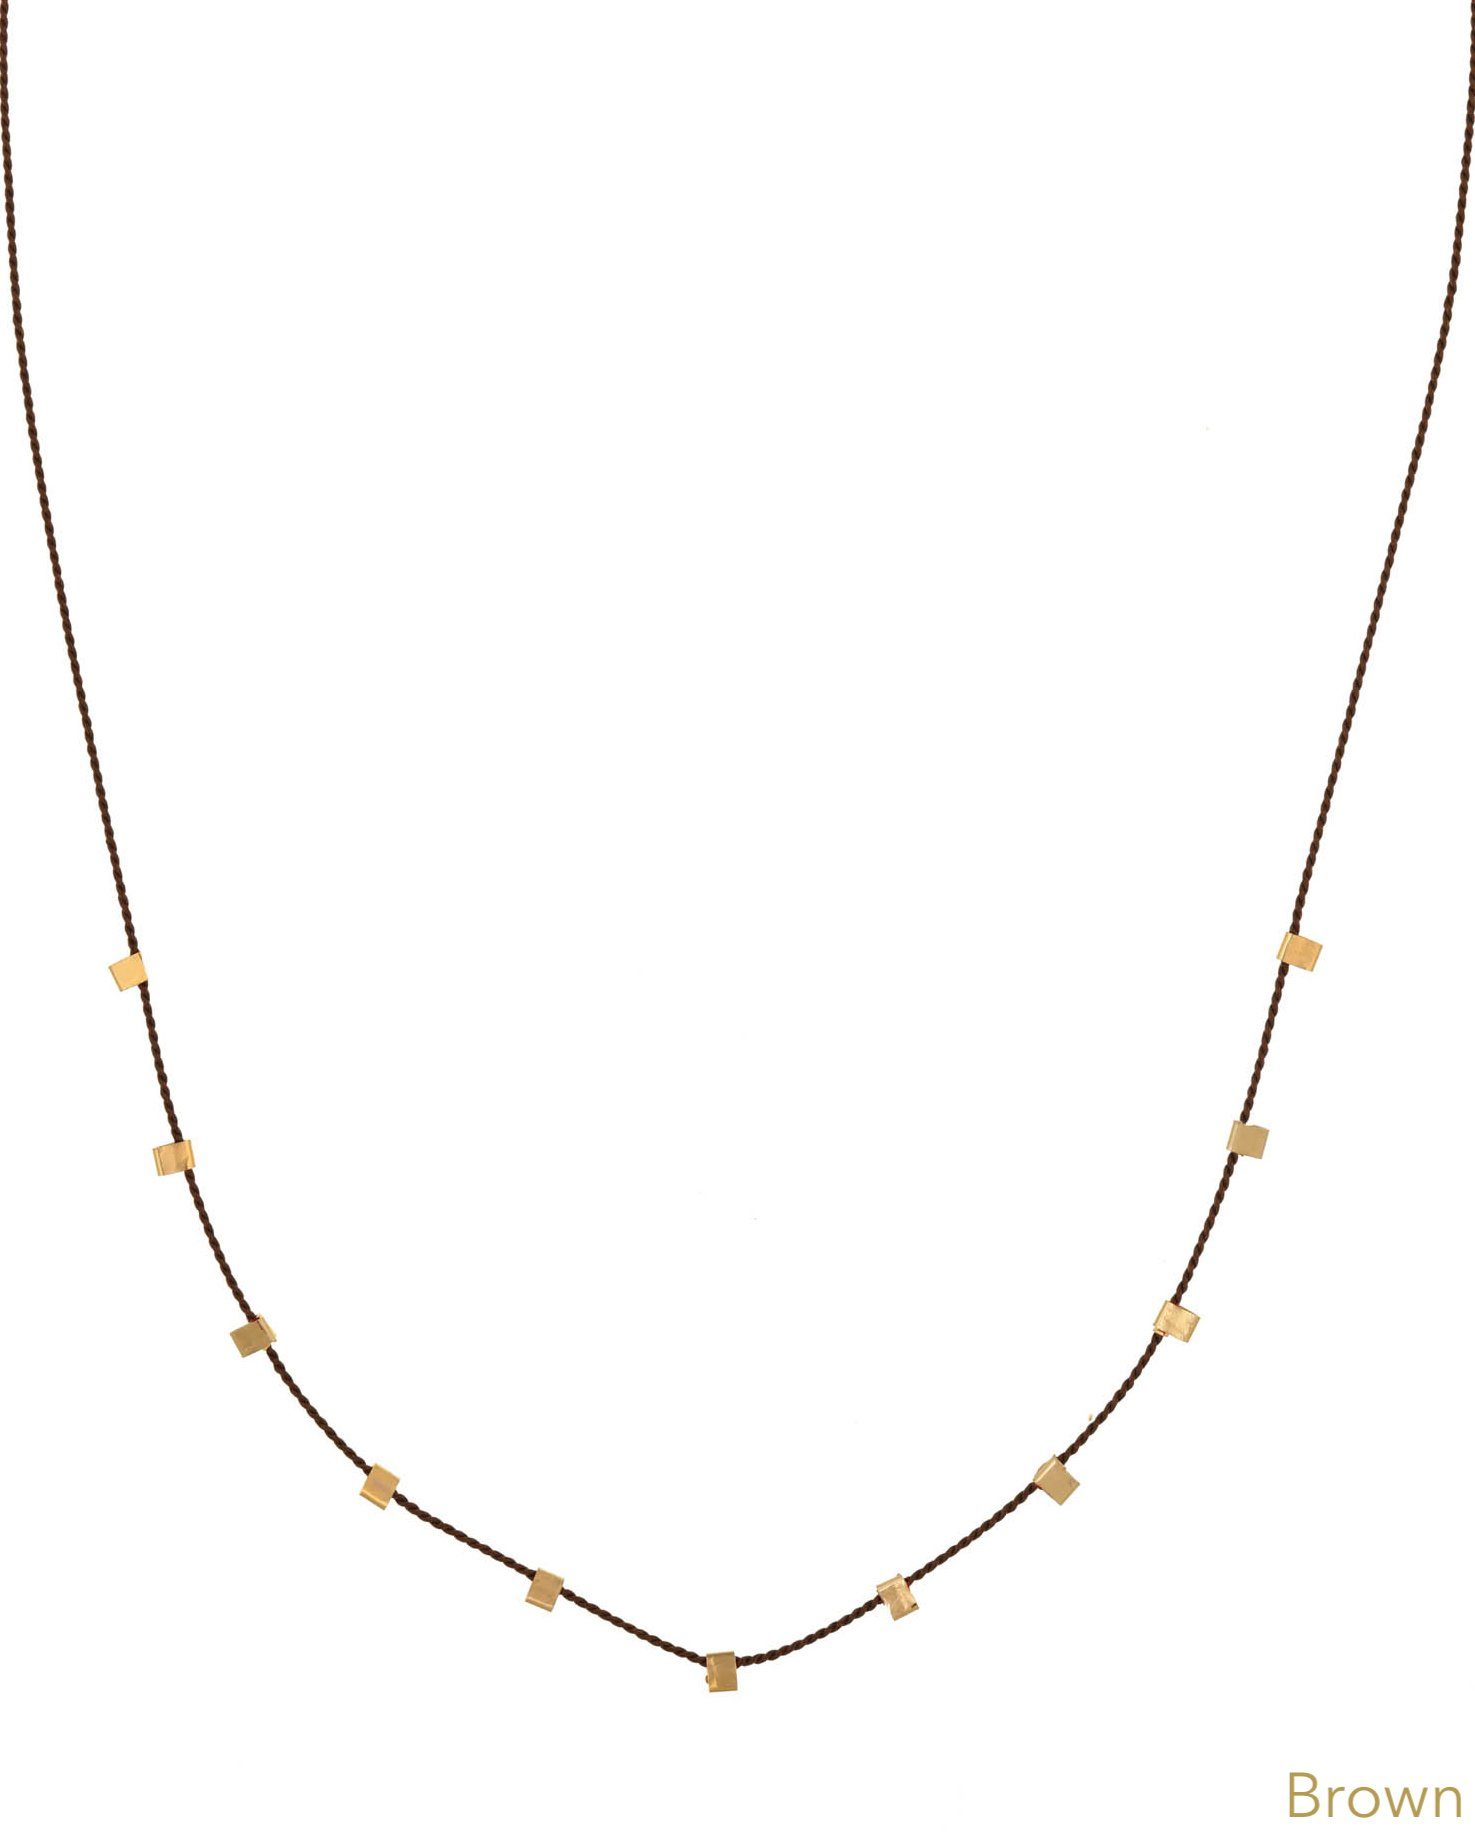 Hilo Necklace by KOZAKH. A 16 inch long natural silk thread necklace, embellished with 14K Gold Filled square cut metals.